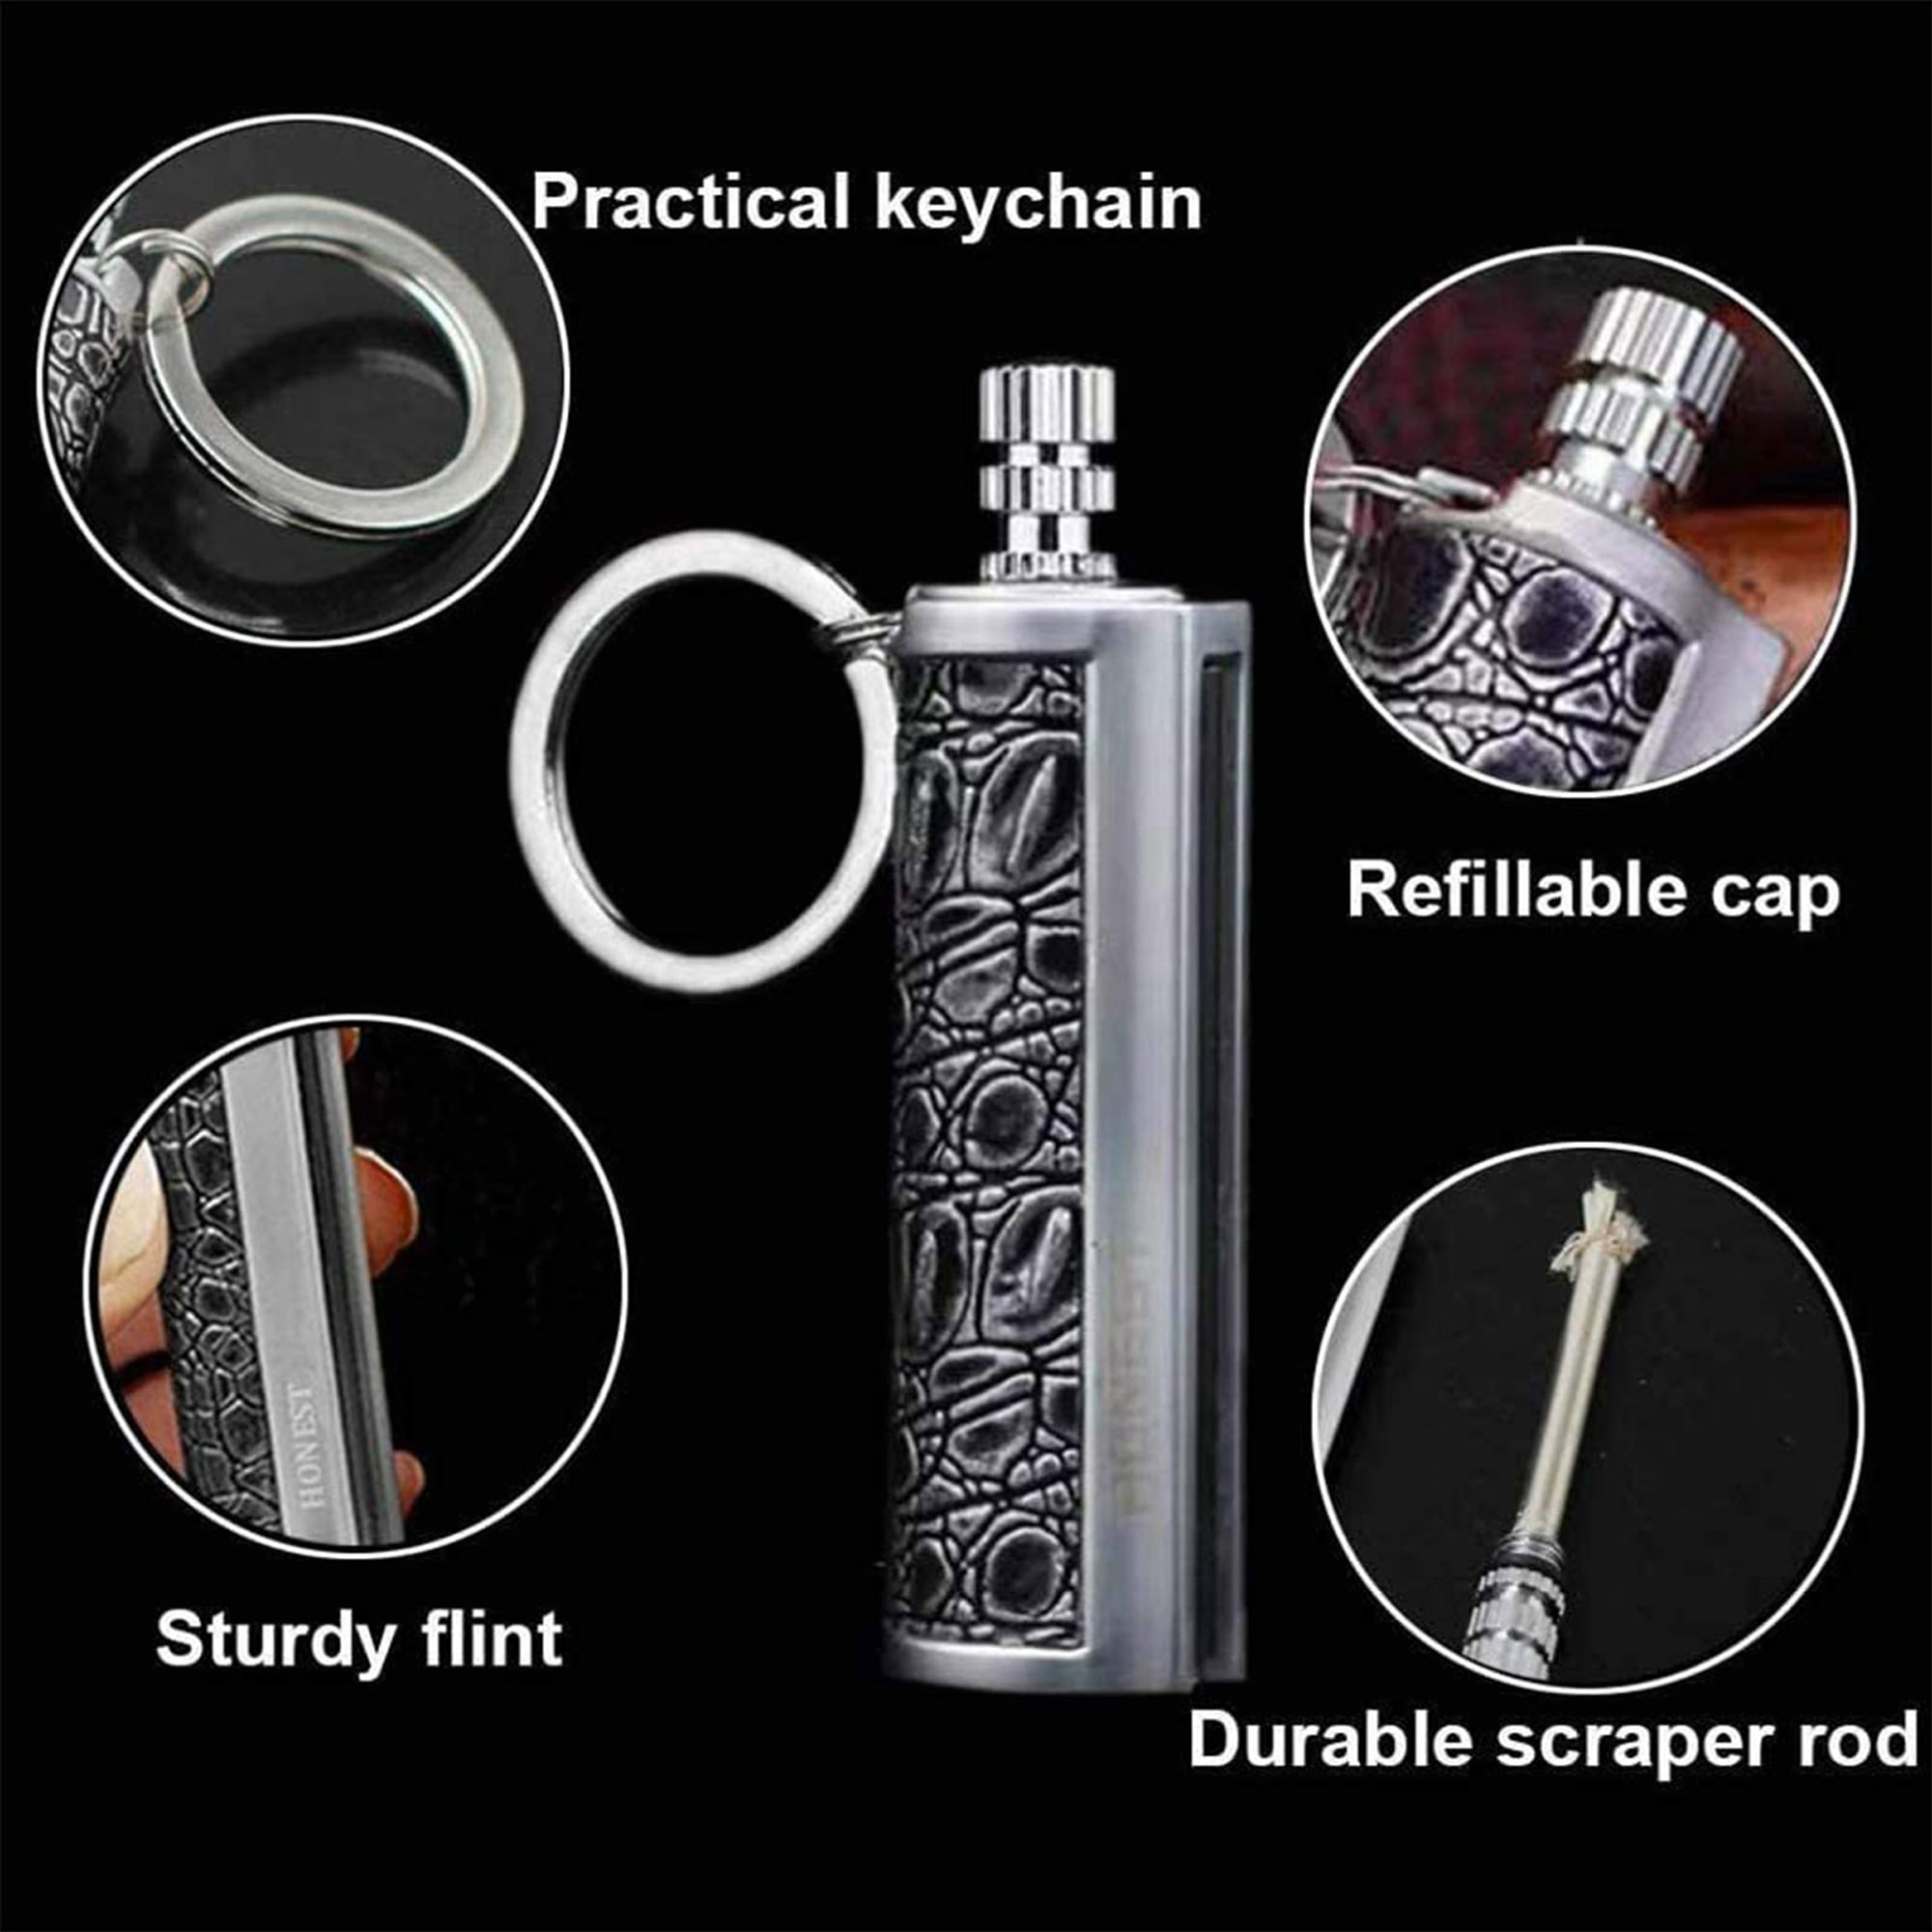 Keychain Flint Metal Matchstick Fire Starter Permanent Match for Emergency Survival Mountaineering Camping Hiking Black XDM 2 Pack Dragons Breath Immortal Lighter Fuel Not Included 